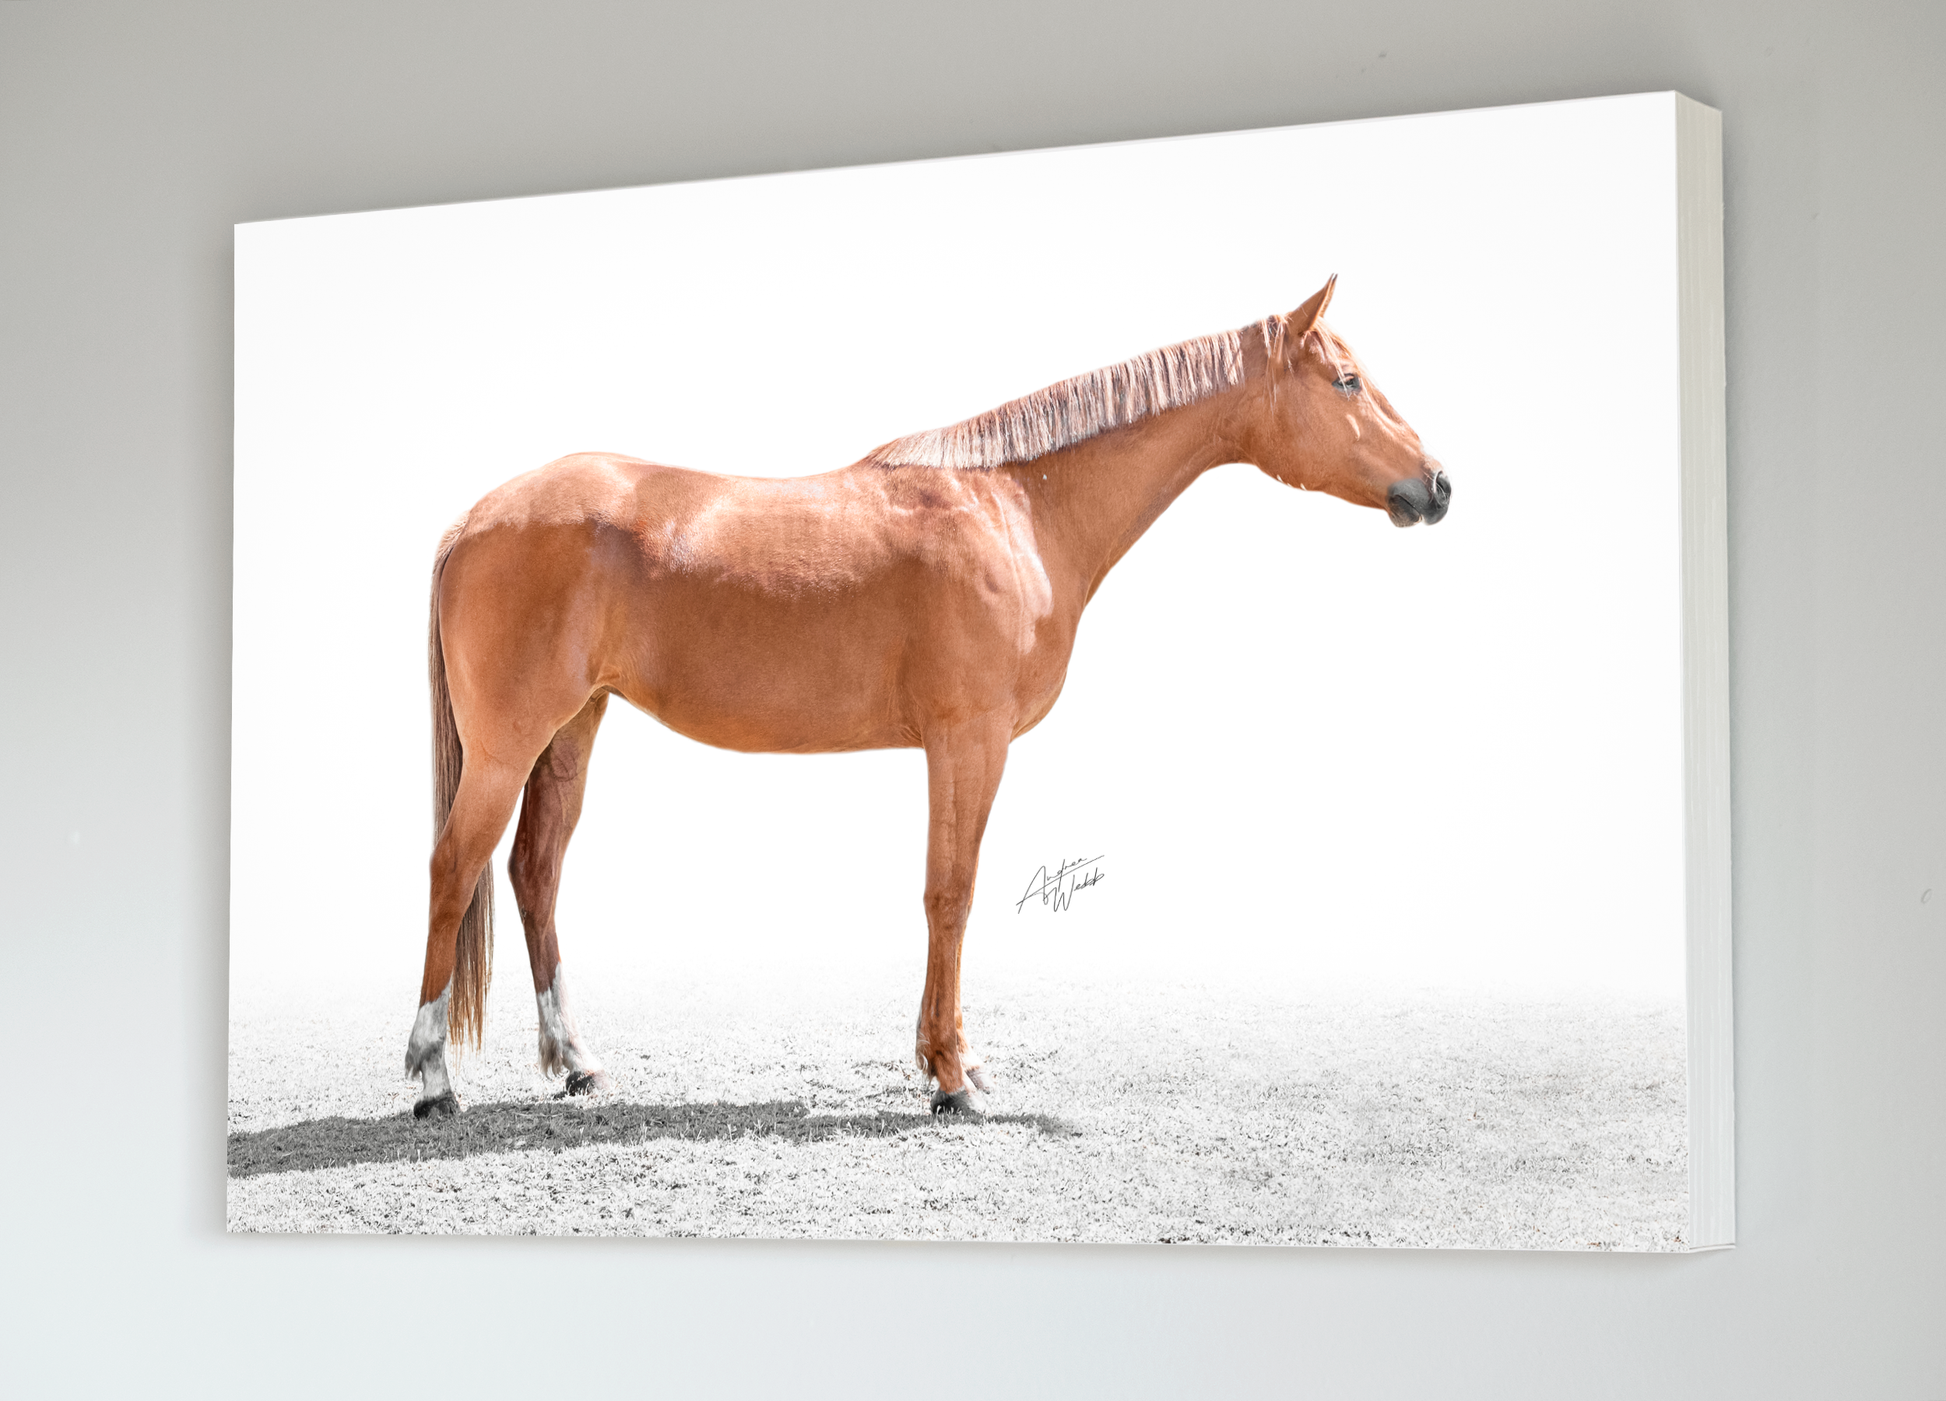 This portrait of a chestnut horse is on a white background. This horse has the classic American Quarter Horse and American Paint Horse build and conformation. The chestnut coat color with flaxen mane and tail makes this horse stand out from the rest. The Chestnut Horse on White Background print would be a great addition to any room with horse lovers or Western decor enthusiasts. Horse Portrait. Horse Prints. Horse Artwork. Animal Photography. Horse photography. Horse wall art.